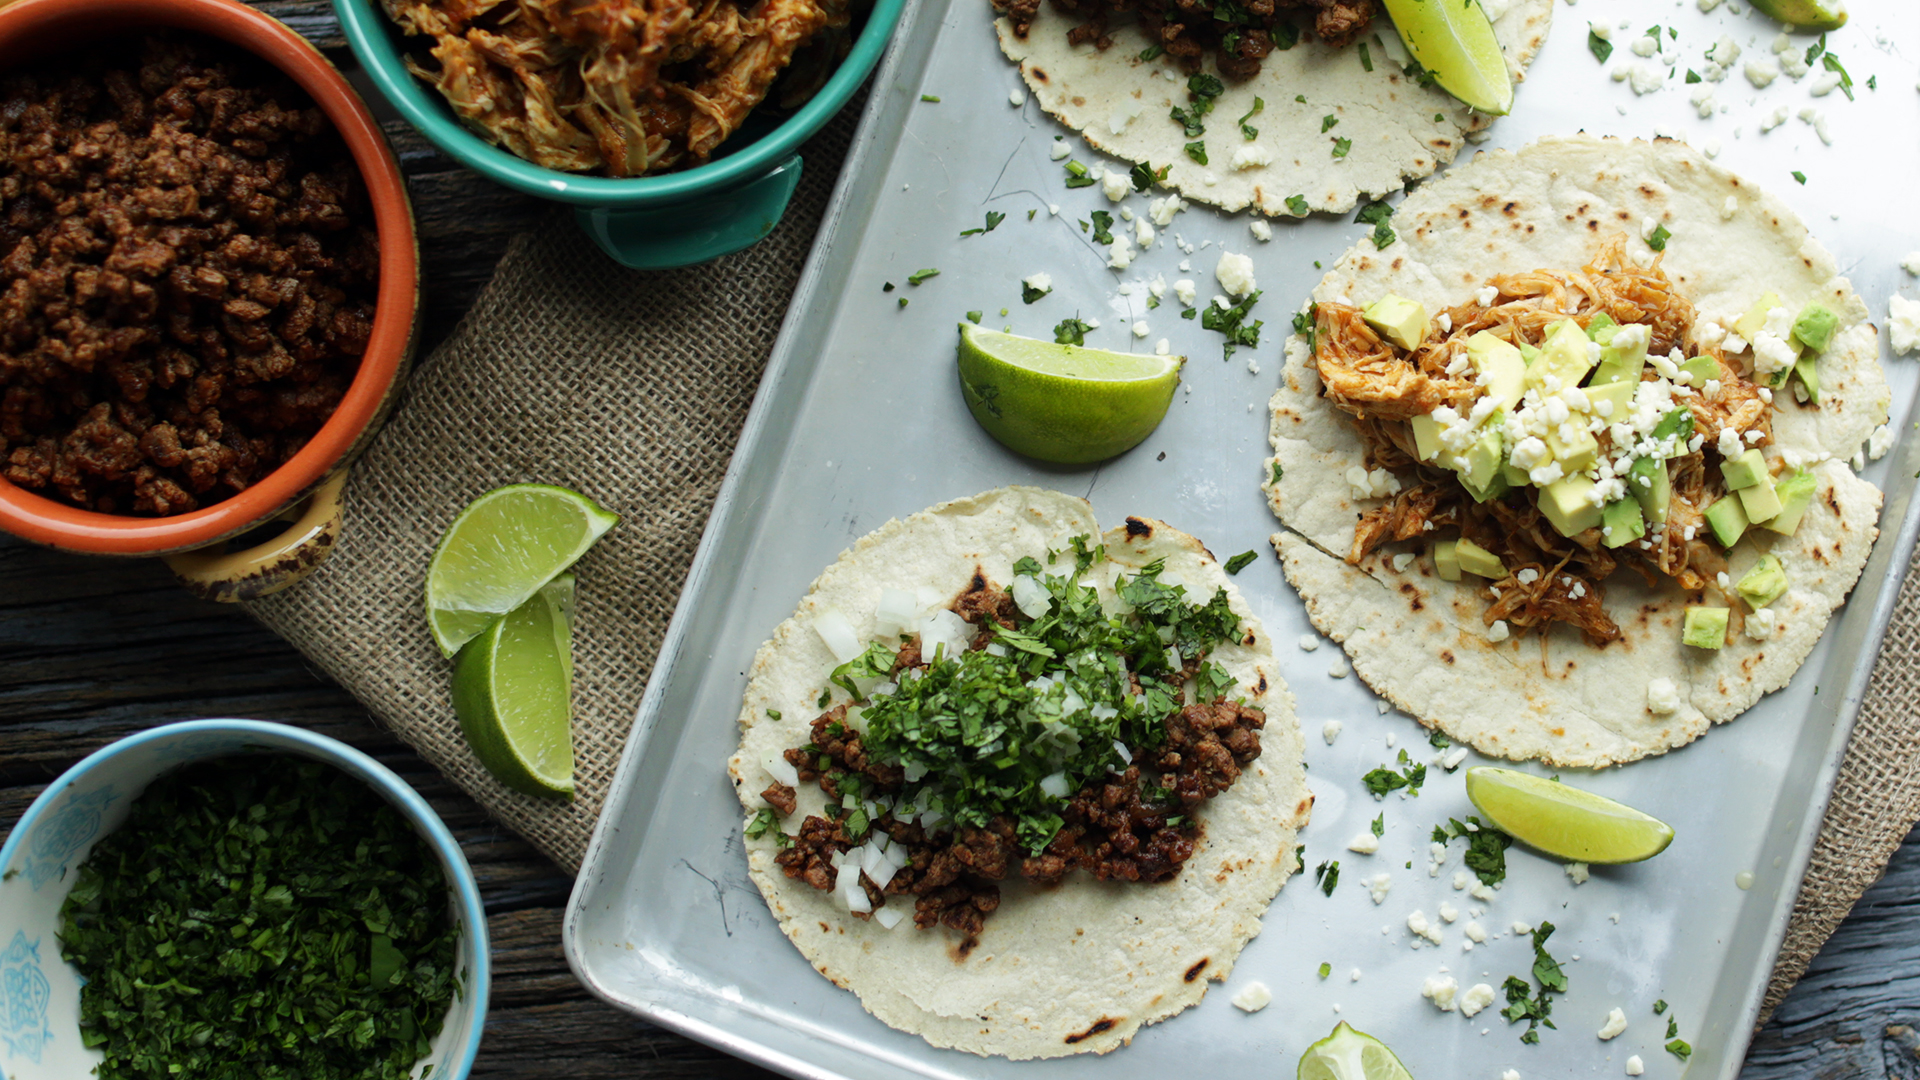 How to Make Authentic Street Tacos for Your Best Taco Tuesday